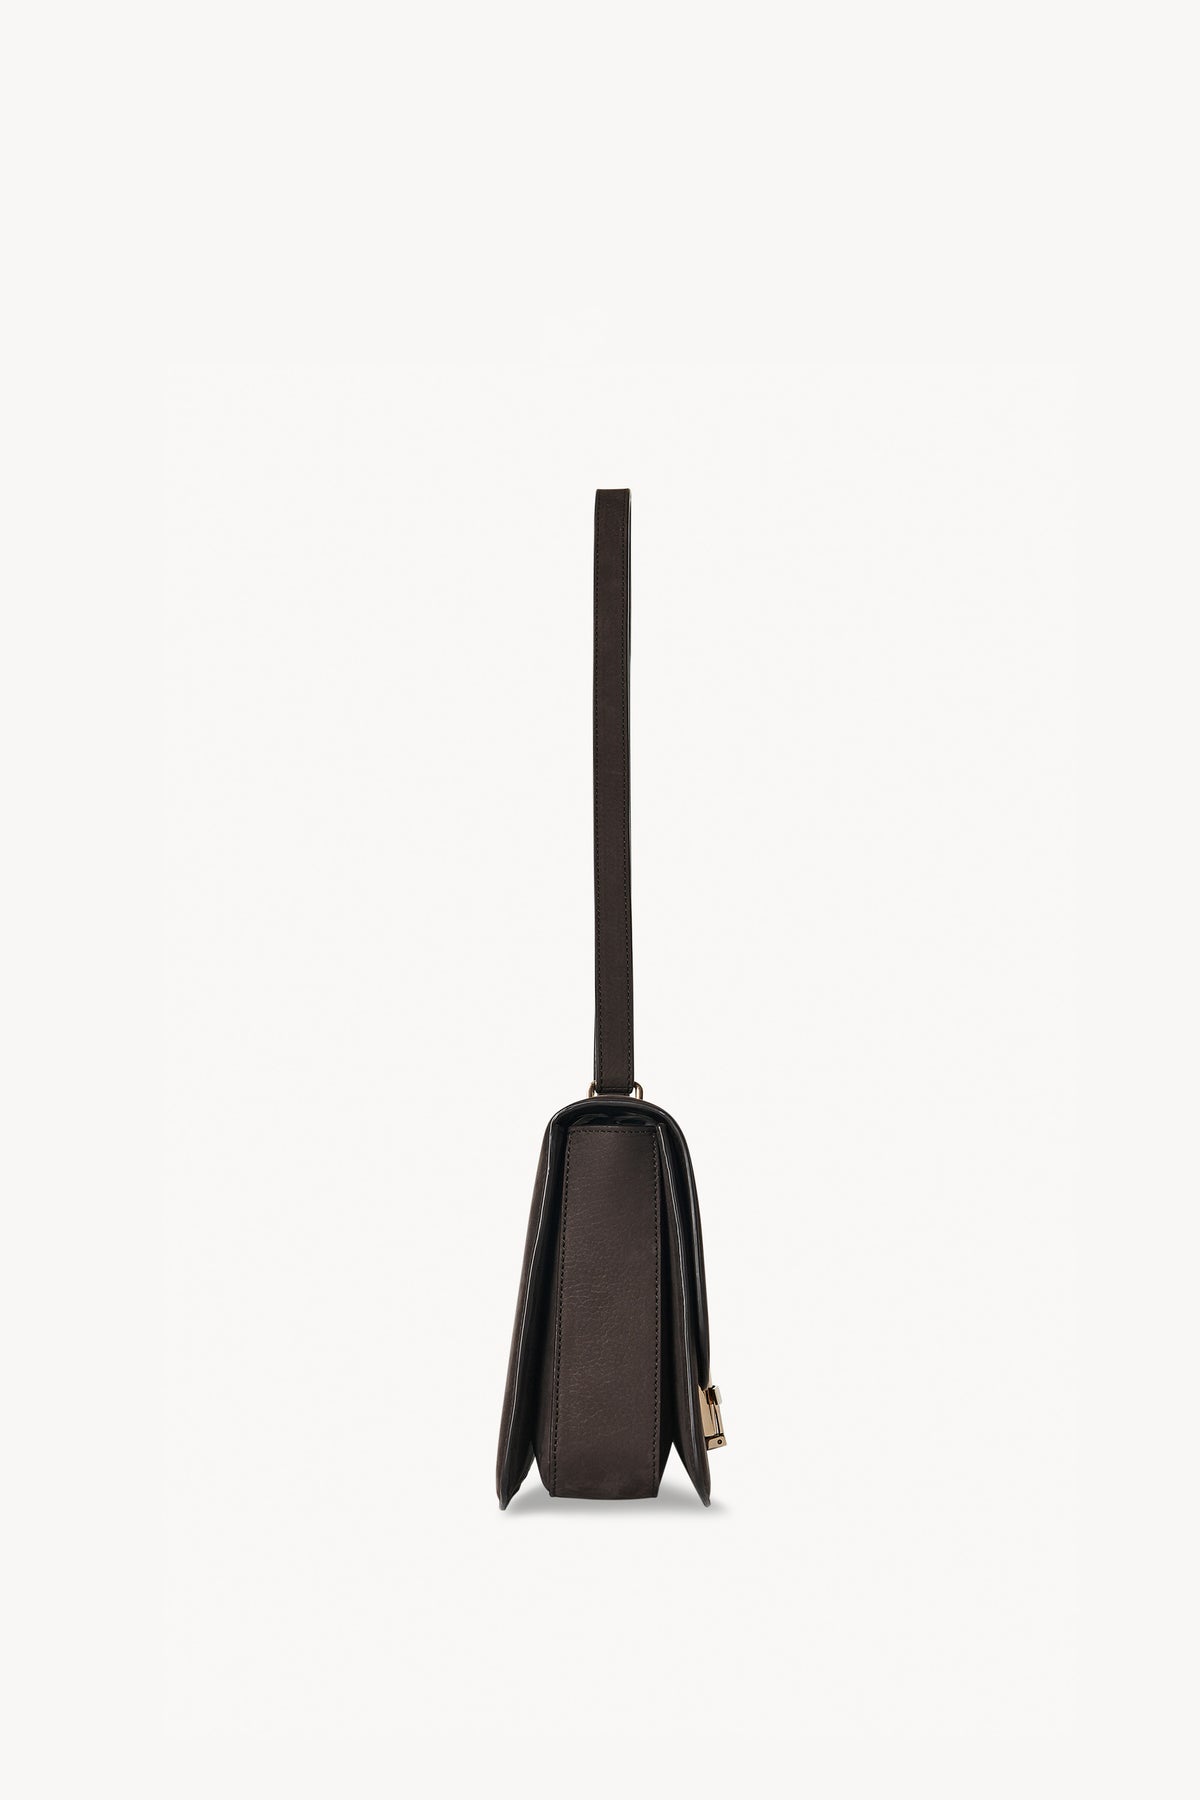 The Row - Sofia 10.00 Shoulder Bag in Nubuck - Wood Brown - One Size